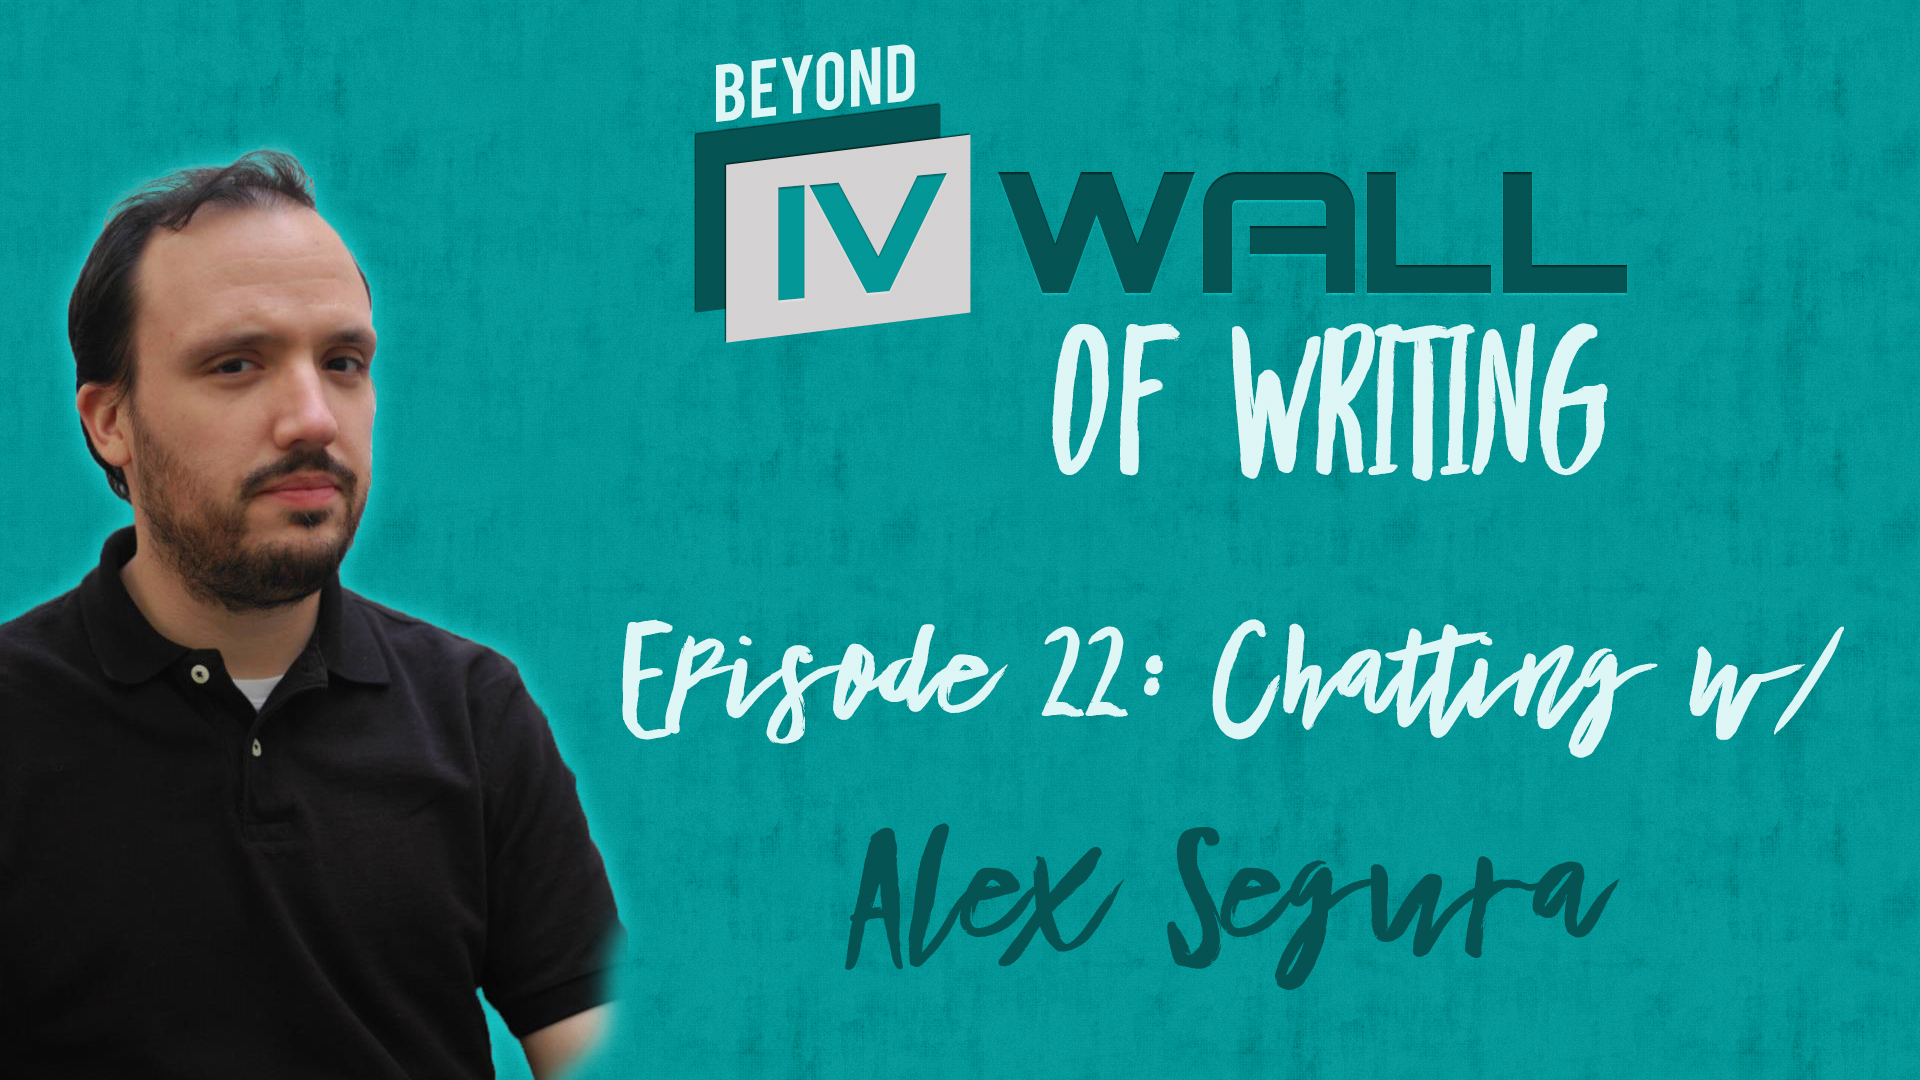 IVWall_Episode_22-_Chatting_with_Alex_Segura_Podcast.jpg 